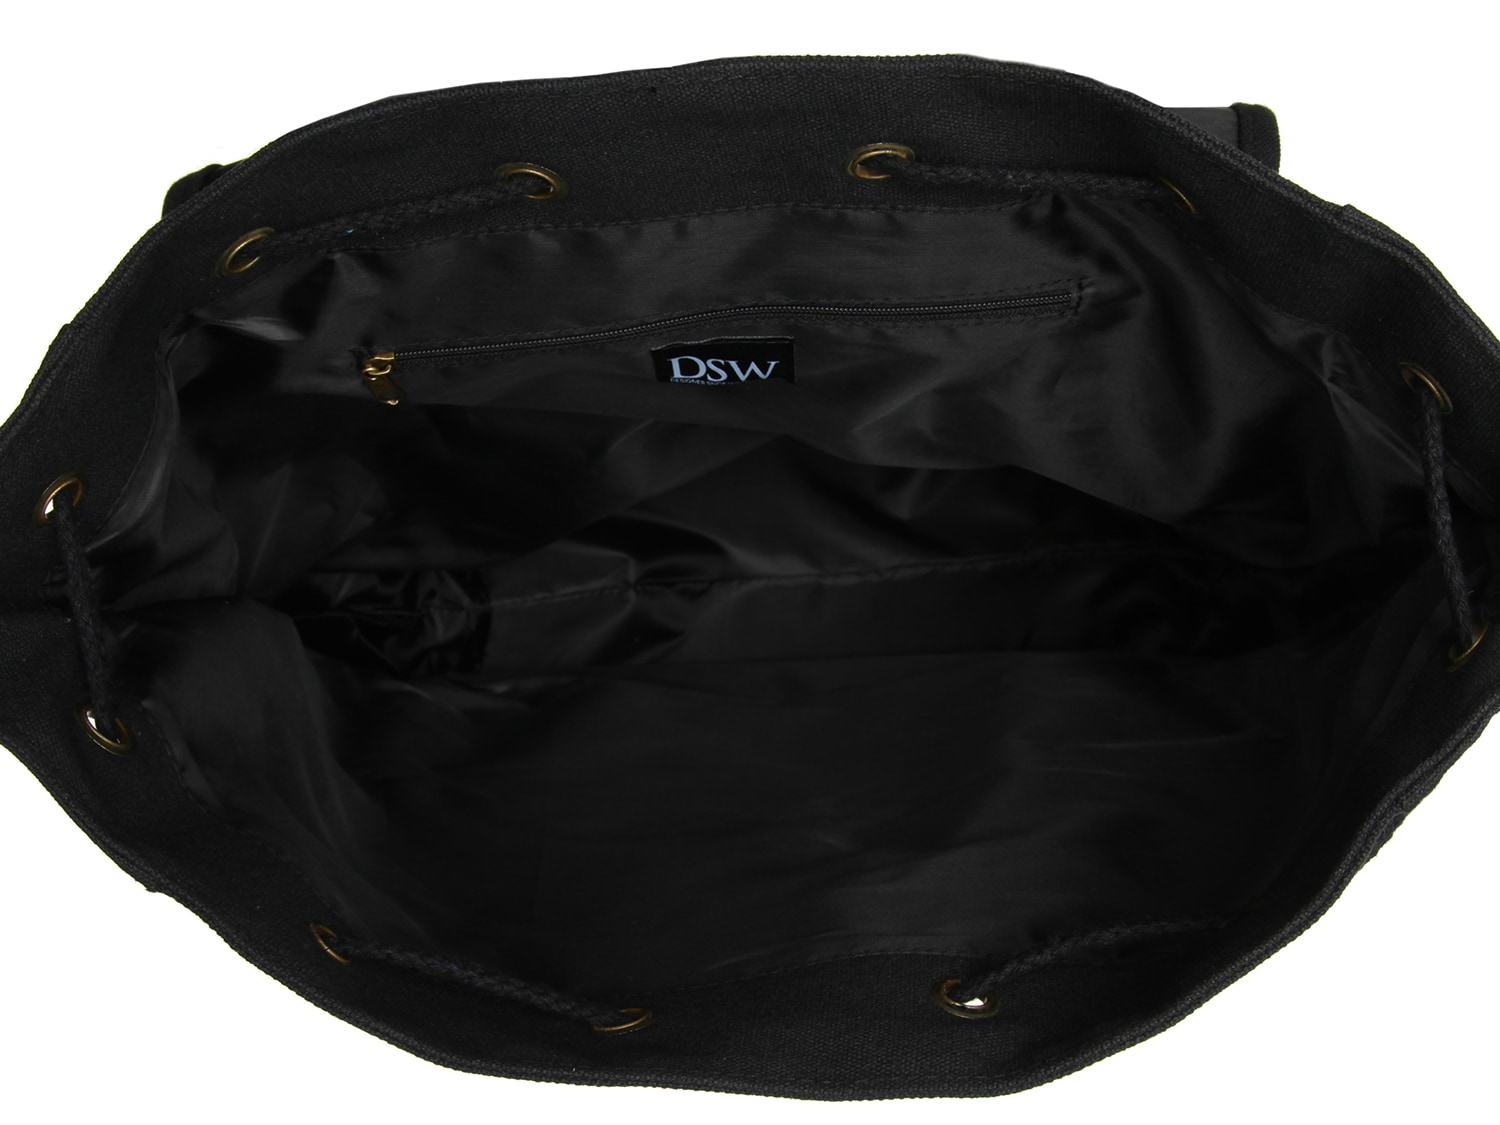 dsw backpack free